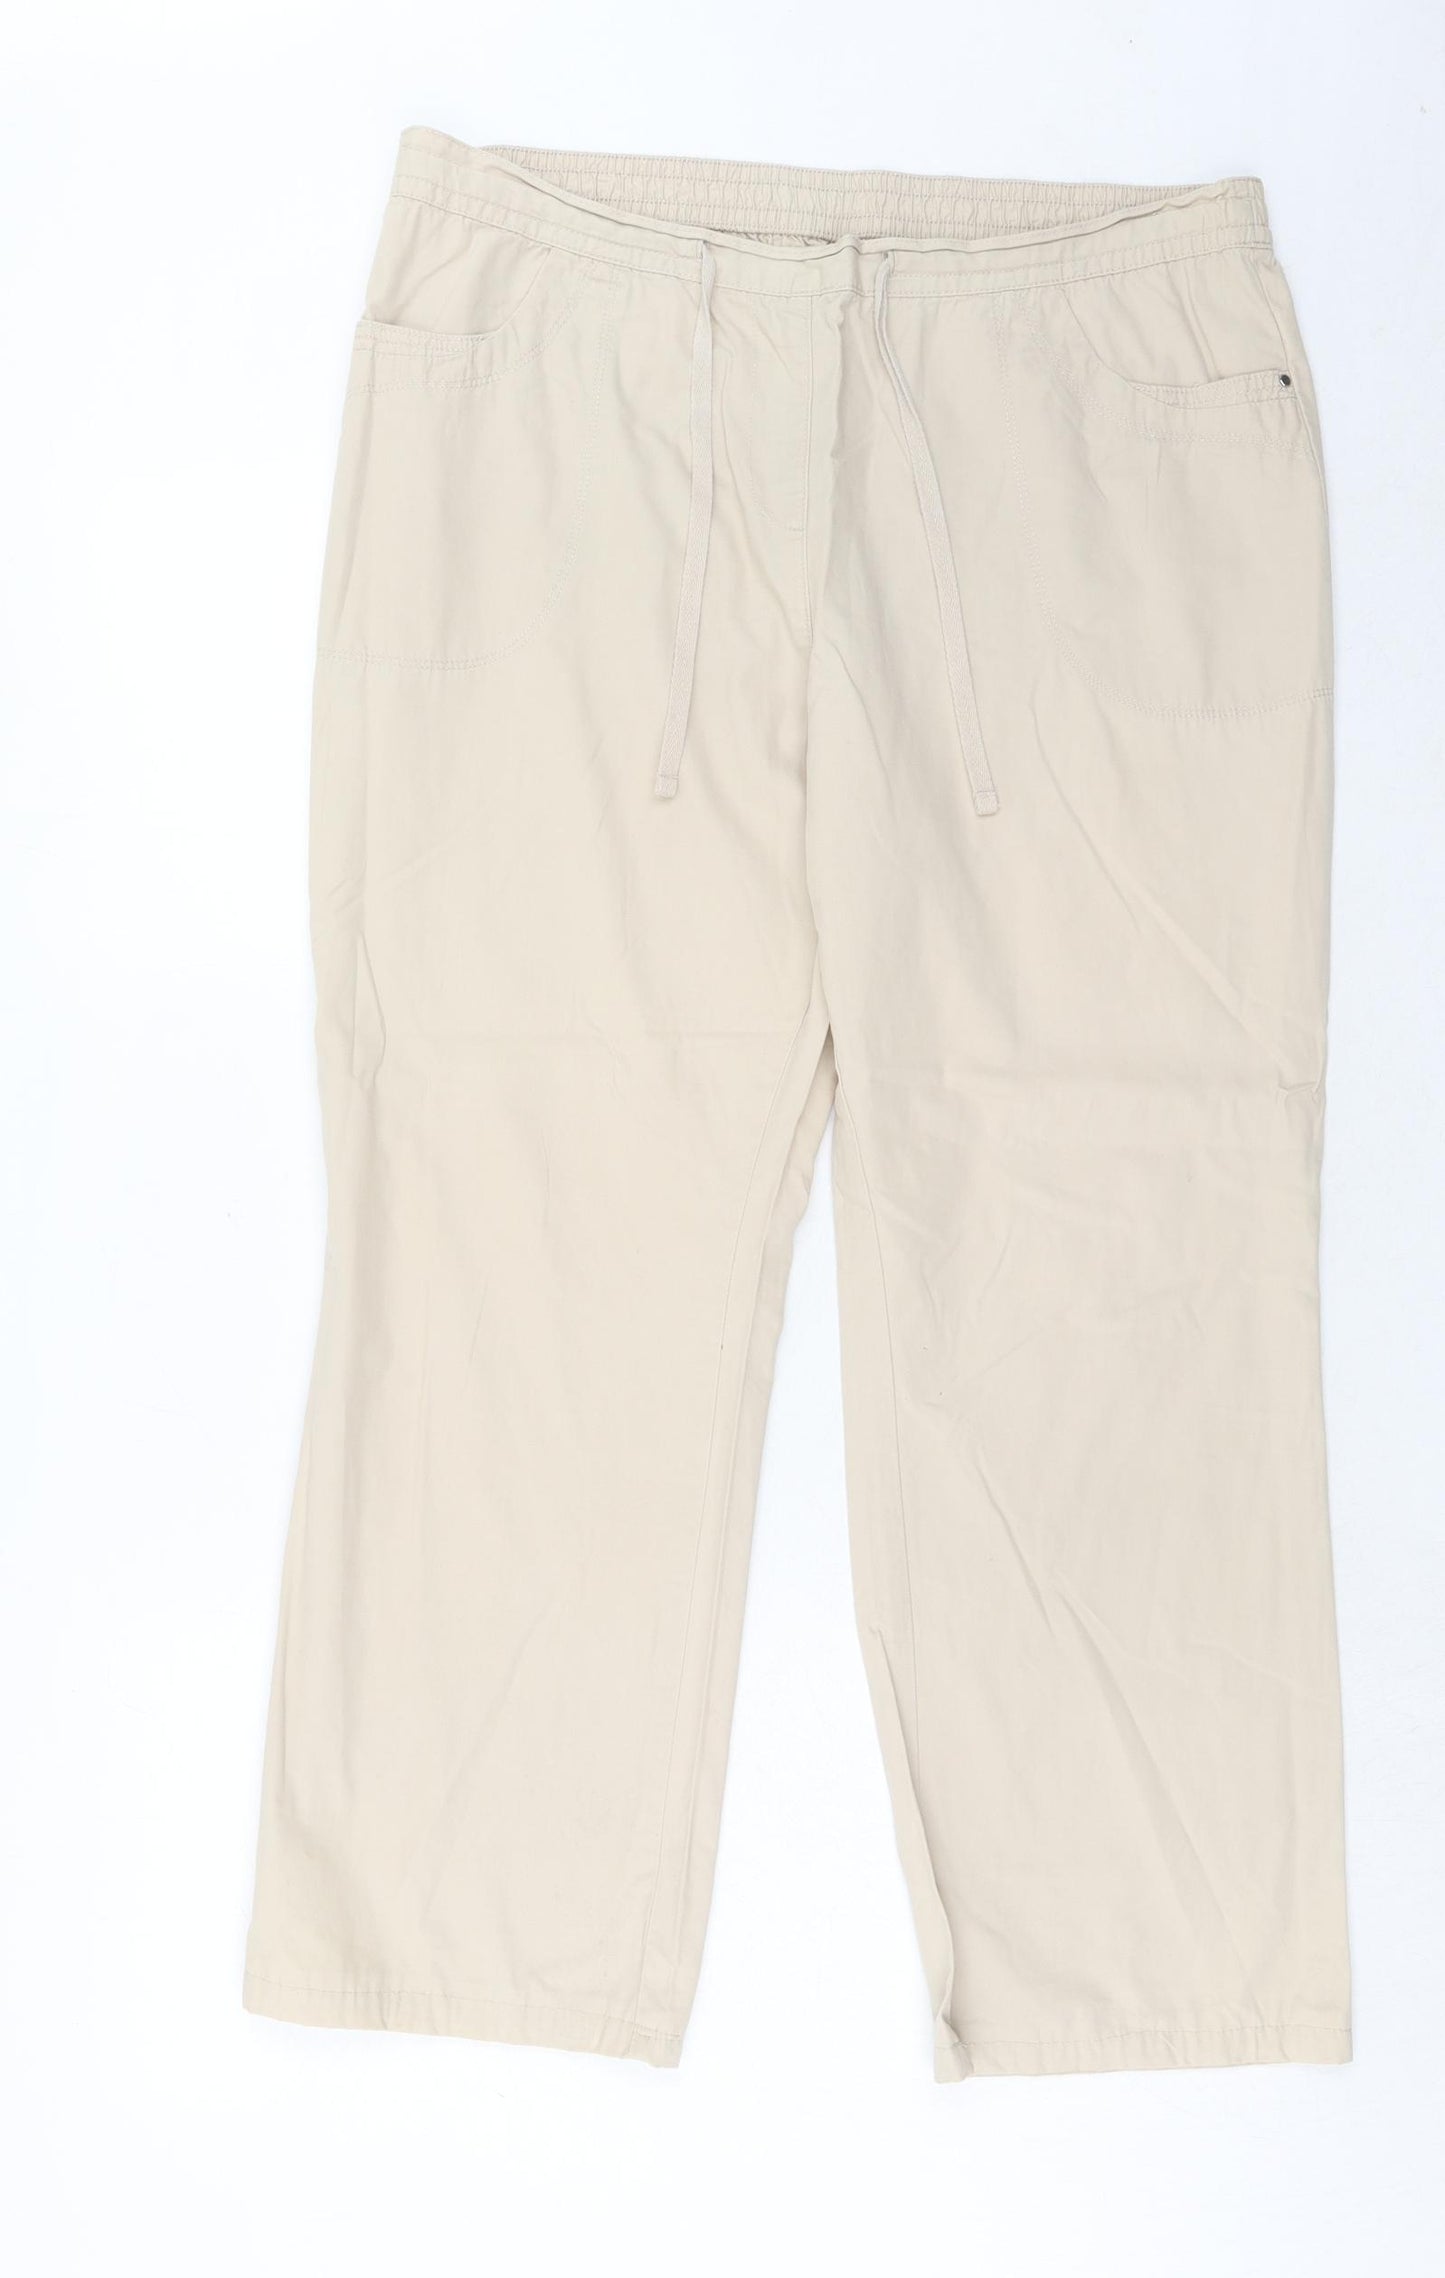 Marks and Spencer Womens Beige Cotton Sweatpants Trousers Size 16 Regular Drawstring